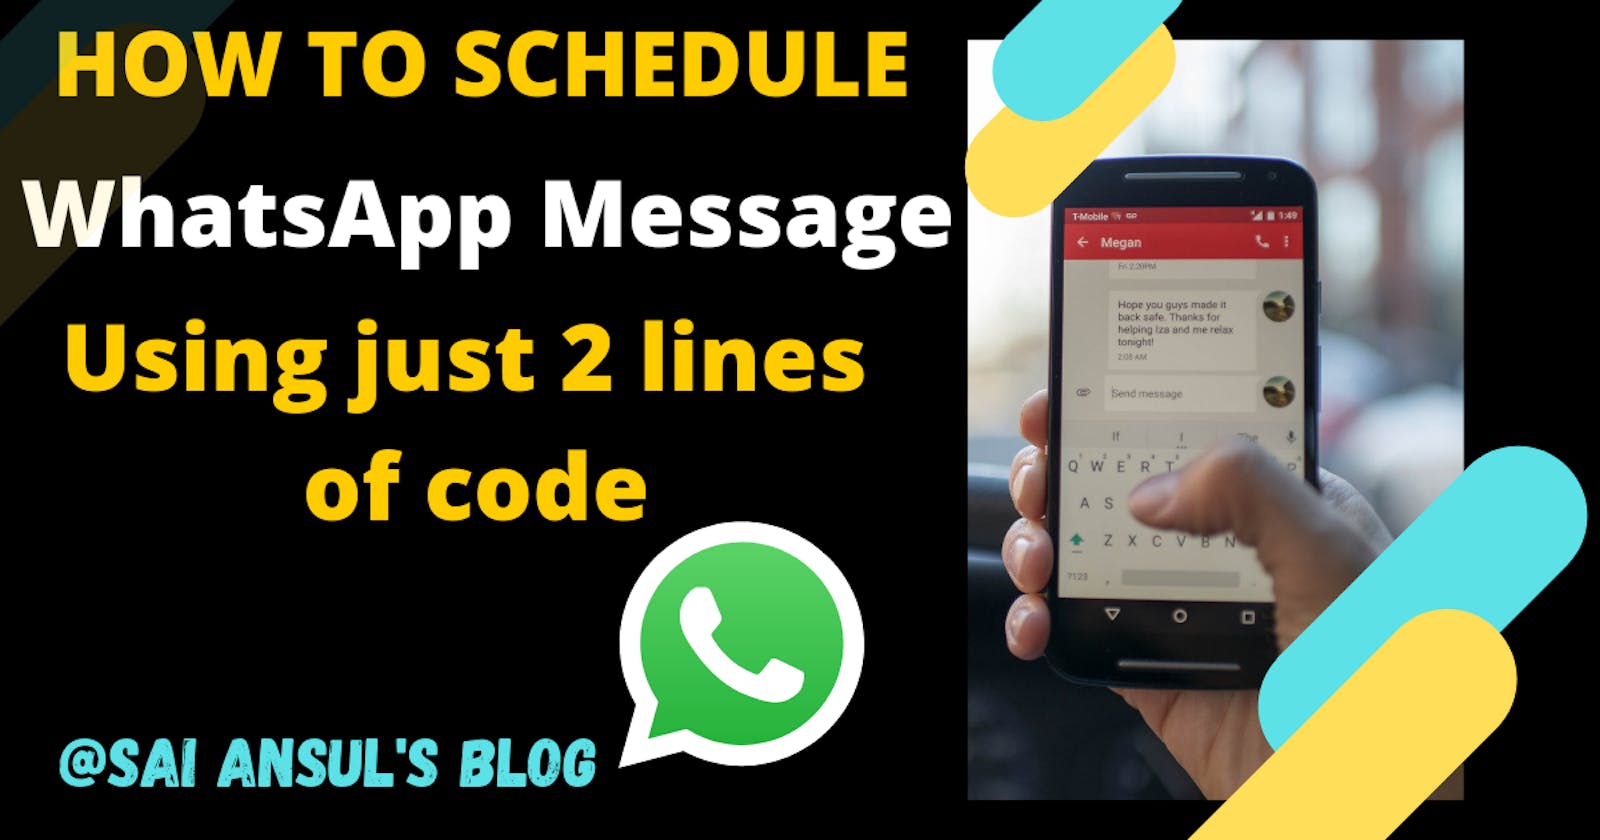 How to schedule WhatsApp message using just 2 lines of code